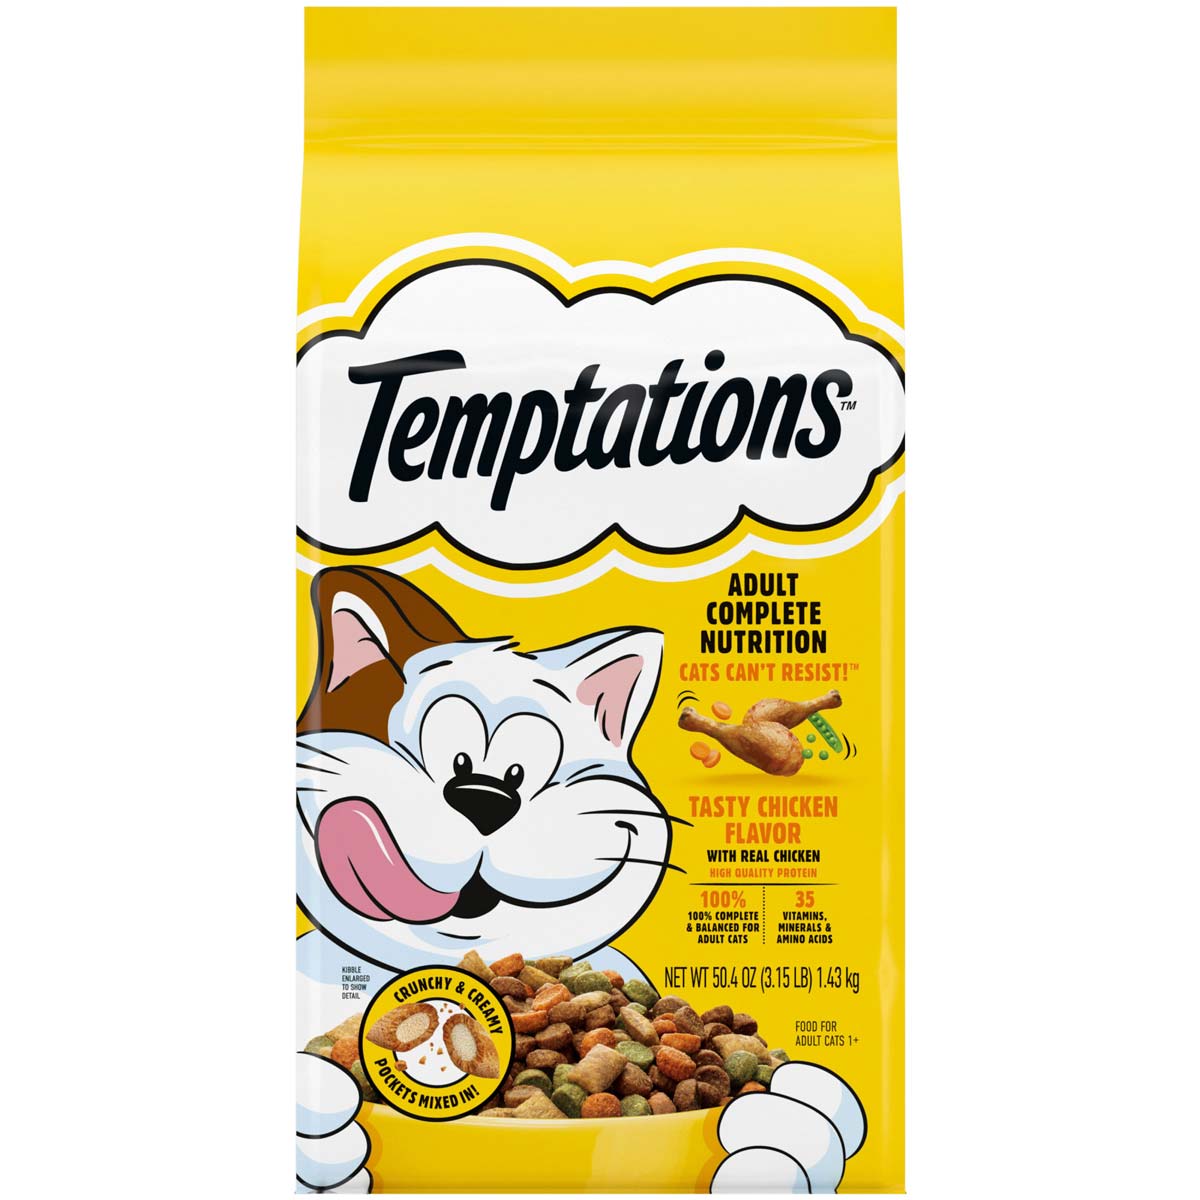 Temptations Tasty Chicken Flavor Adult Dry Cat Food, 3.15 Pounds